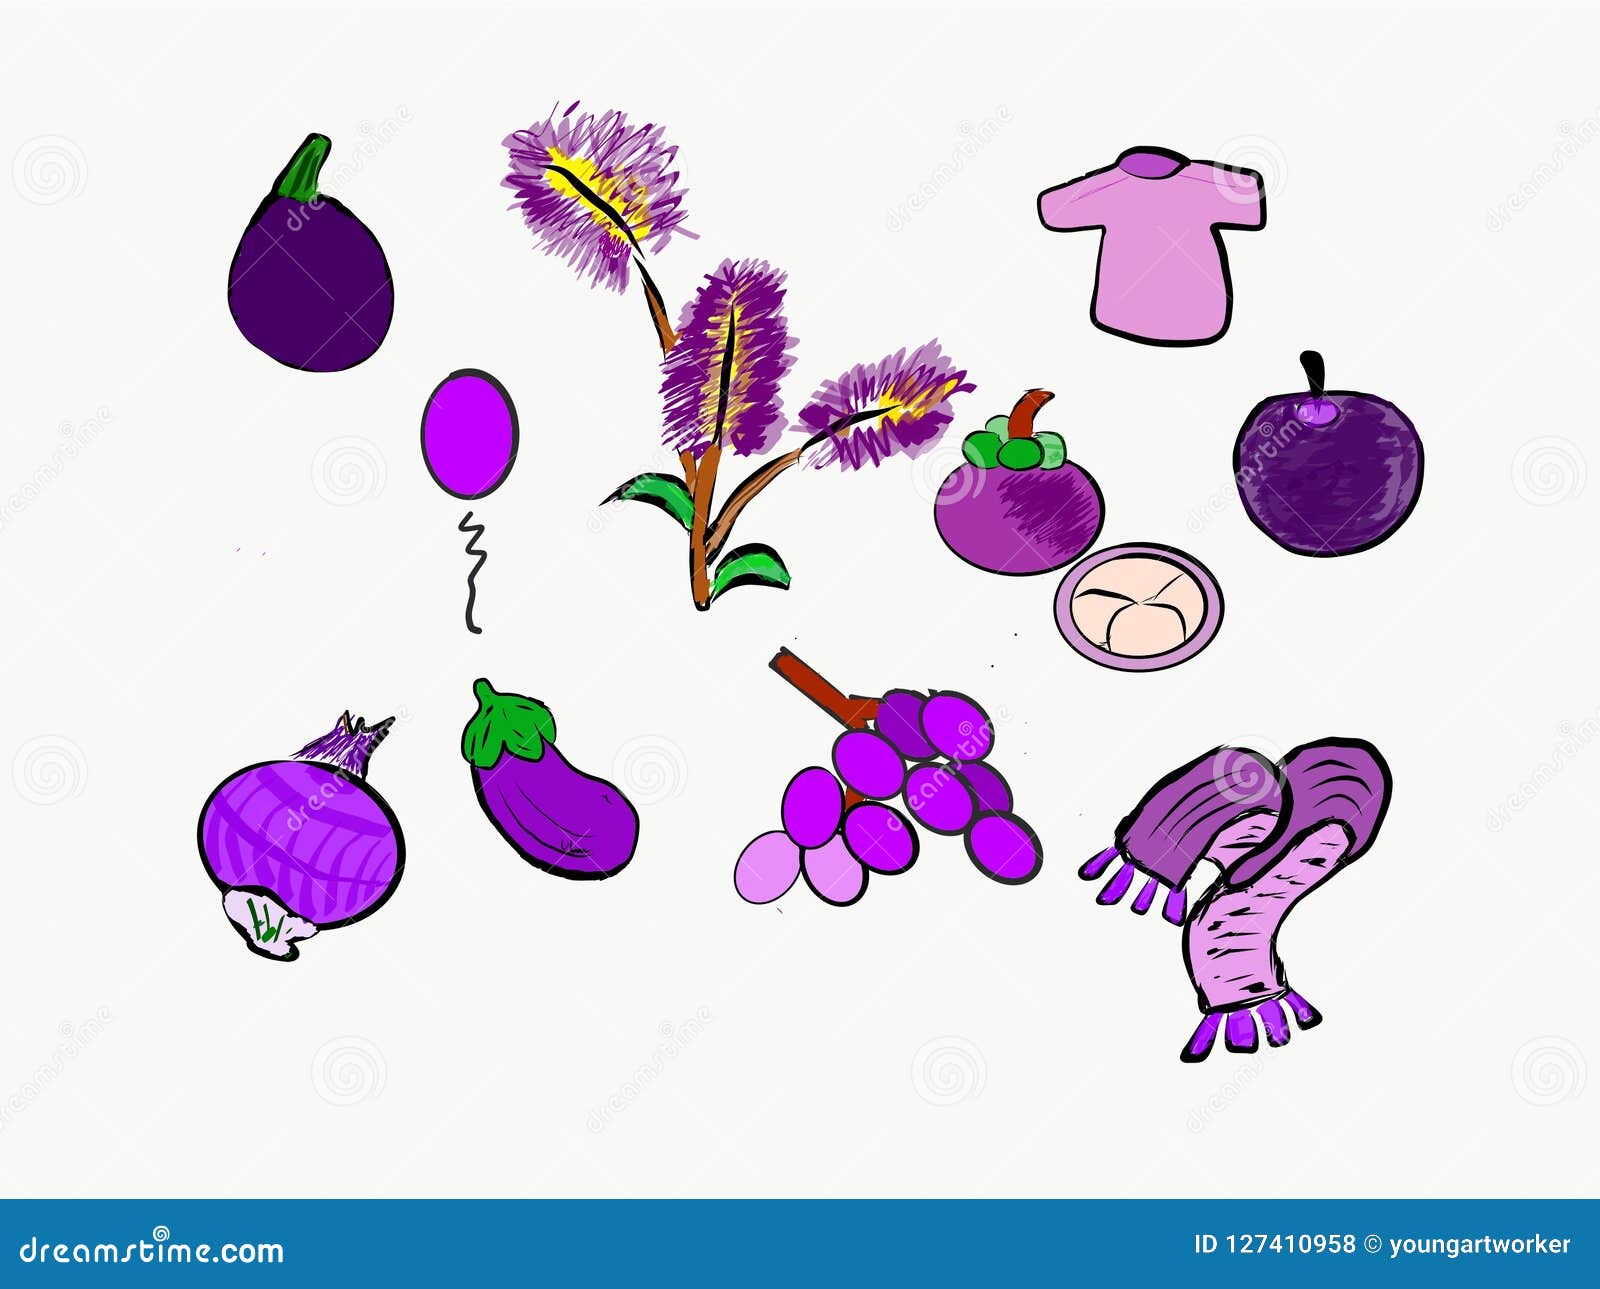 Purple Clip Art - Things that are Purple Color